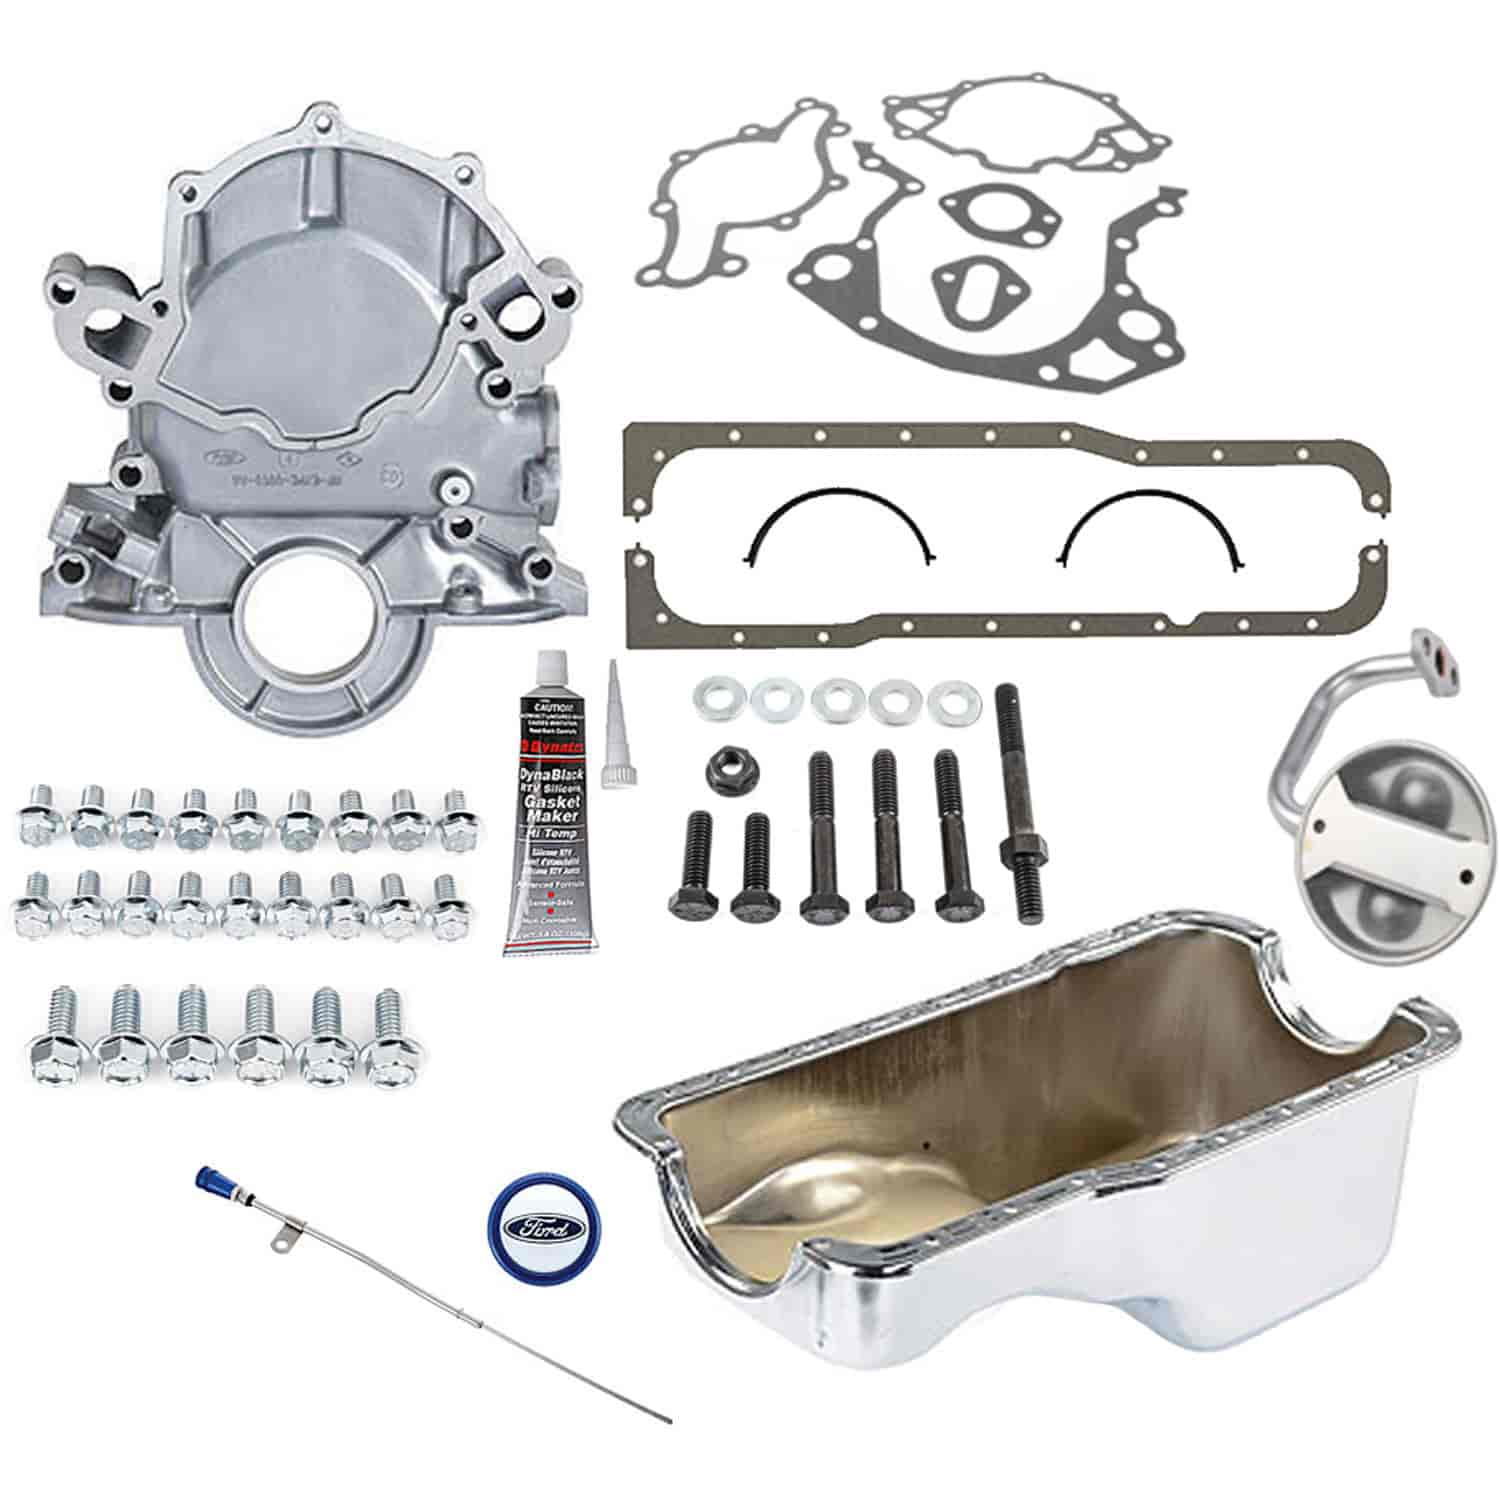 Timing Chain Cover and Oil Pan Upgrade Kit Fits Ford 289/302/351W